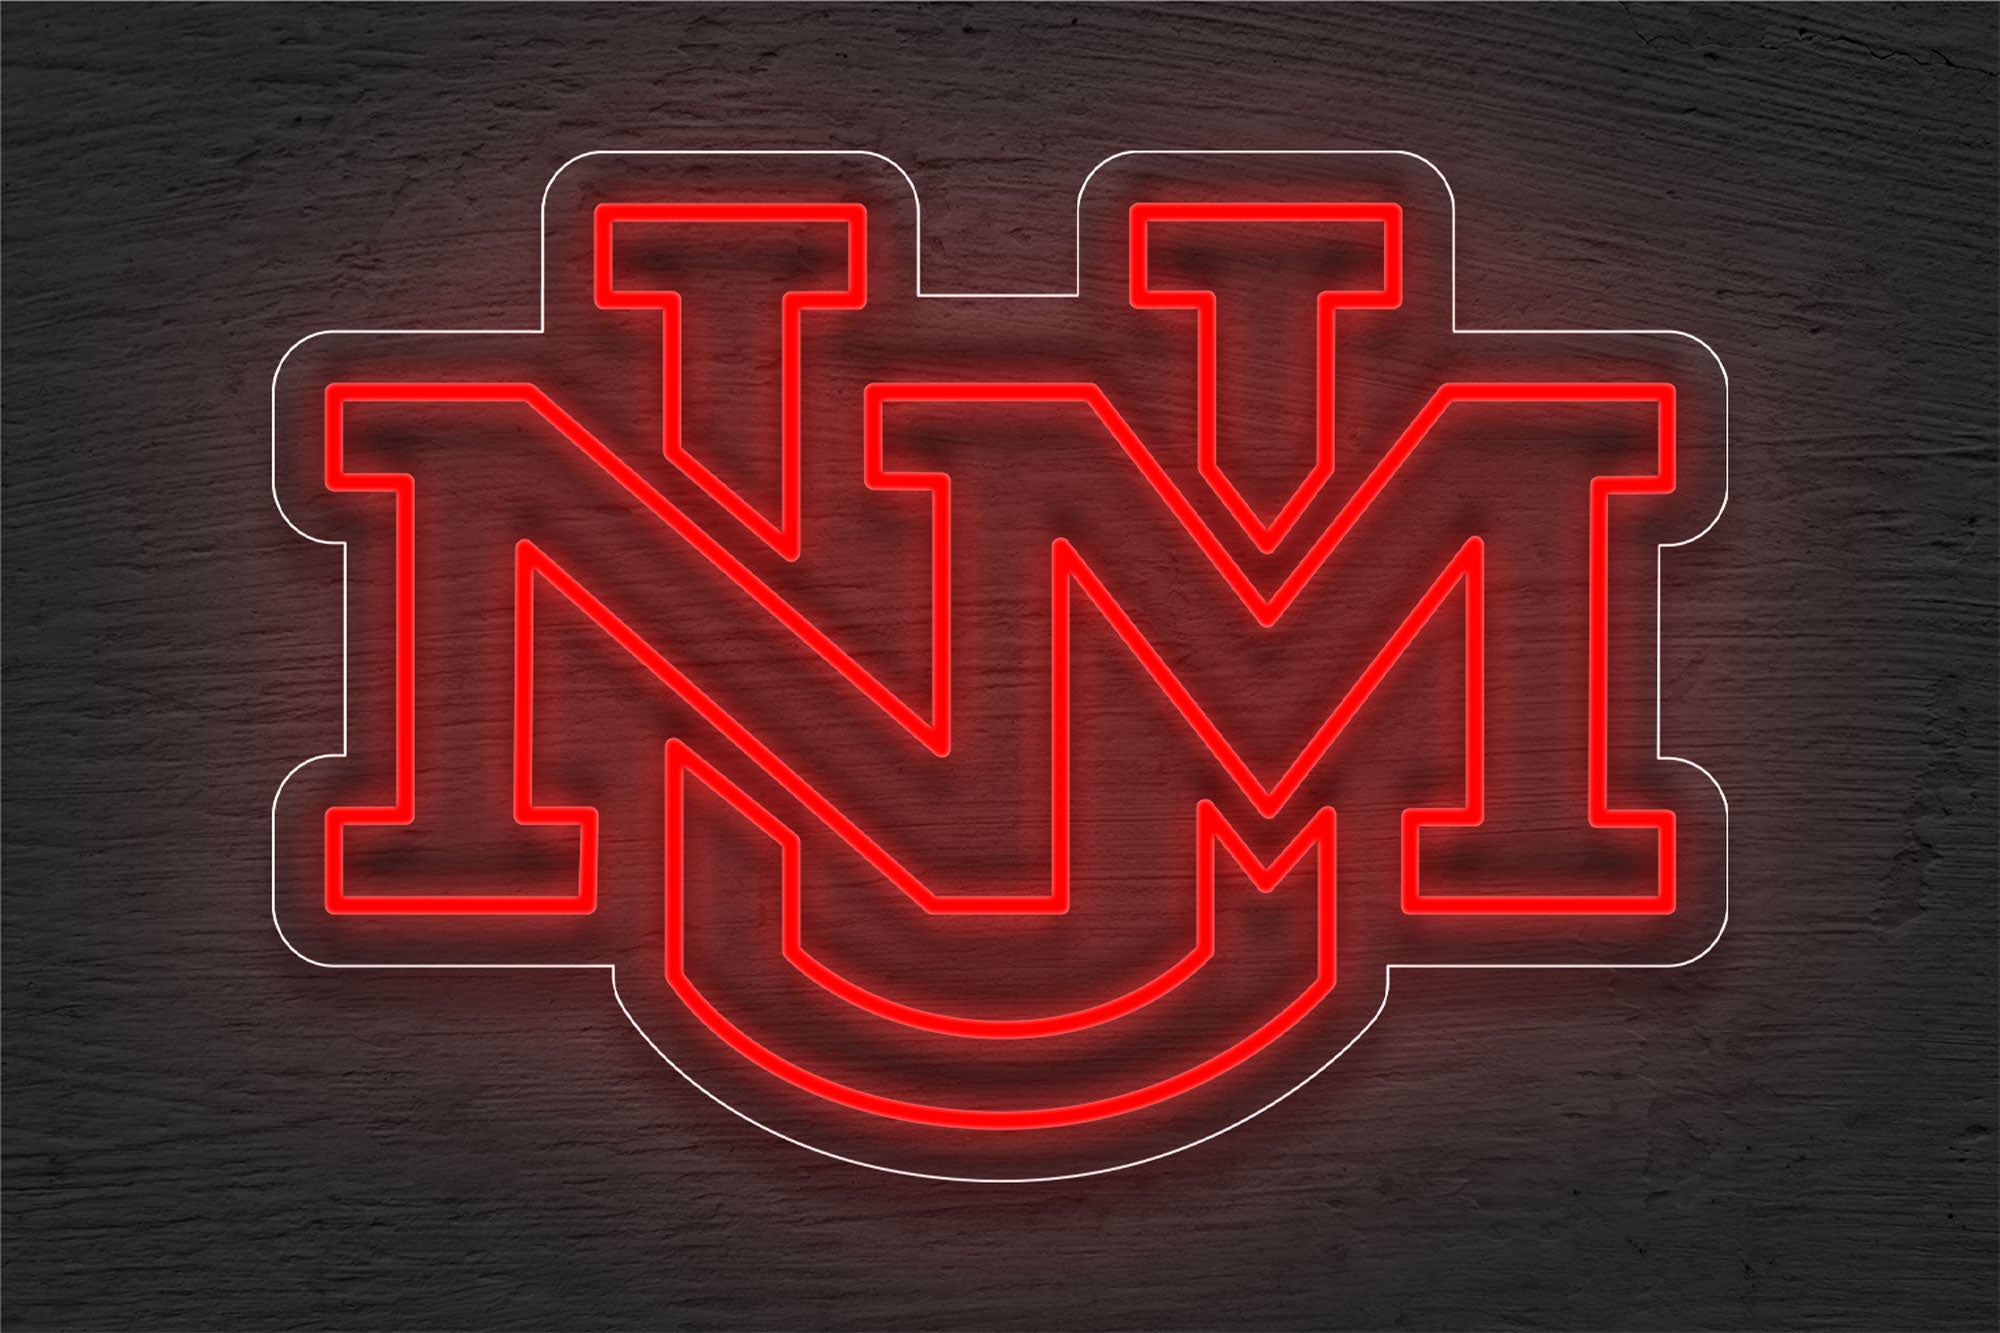 University of New Mexico LED Neon Sign